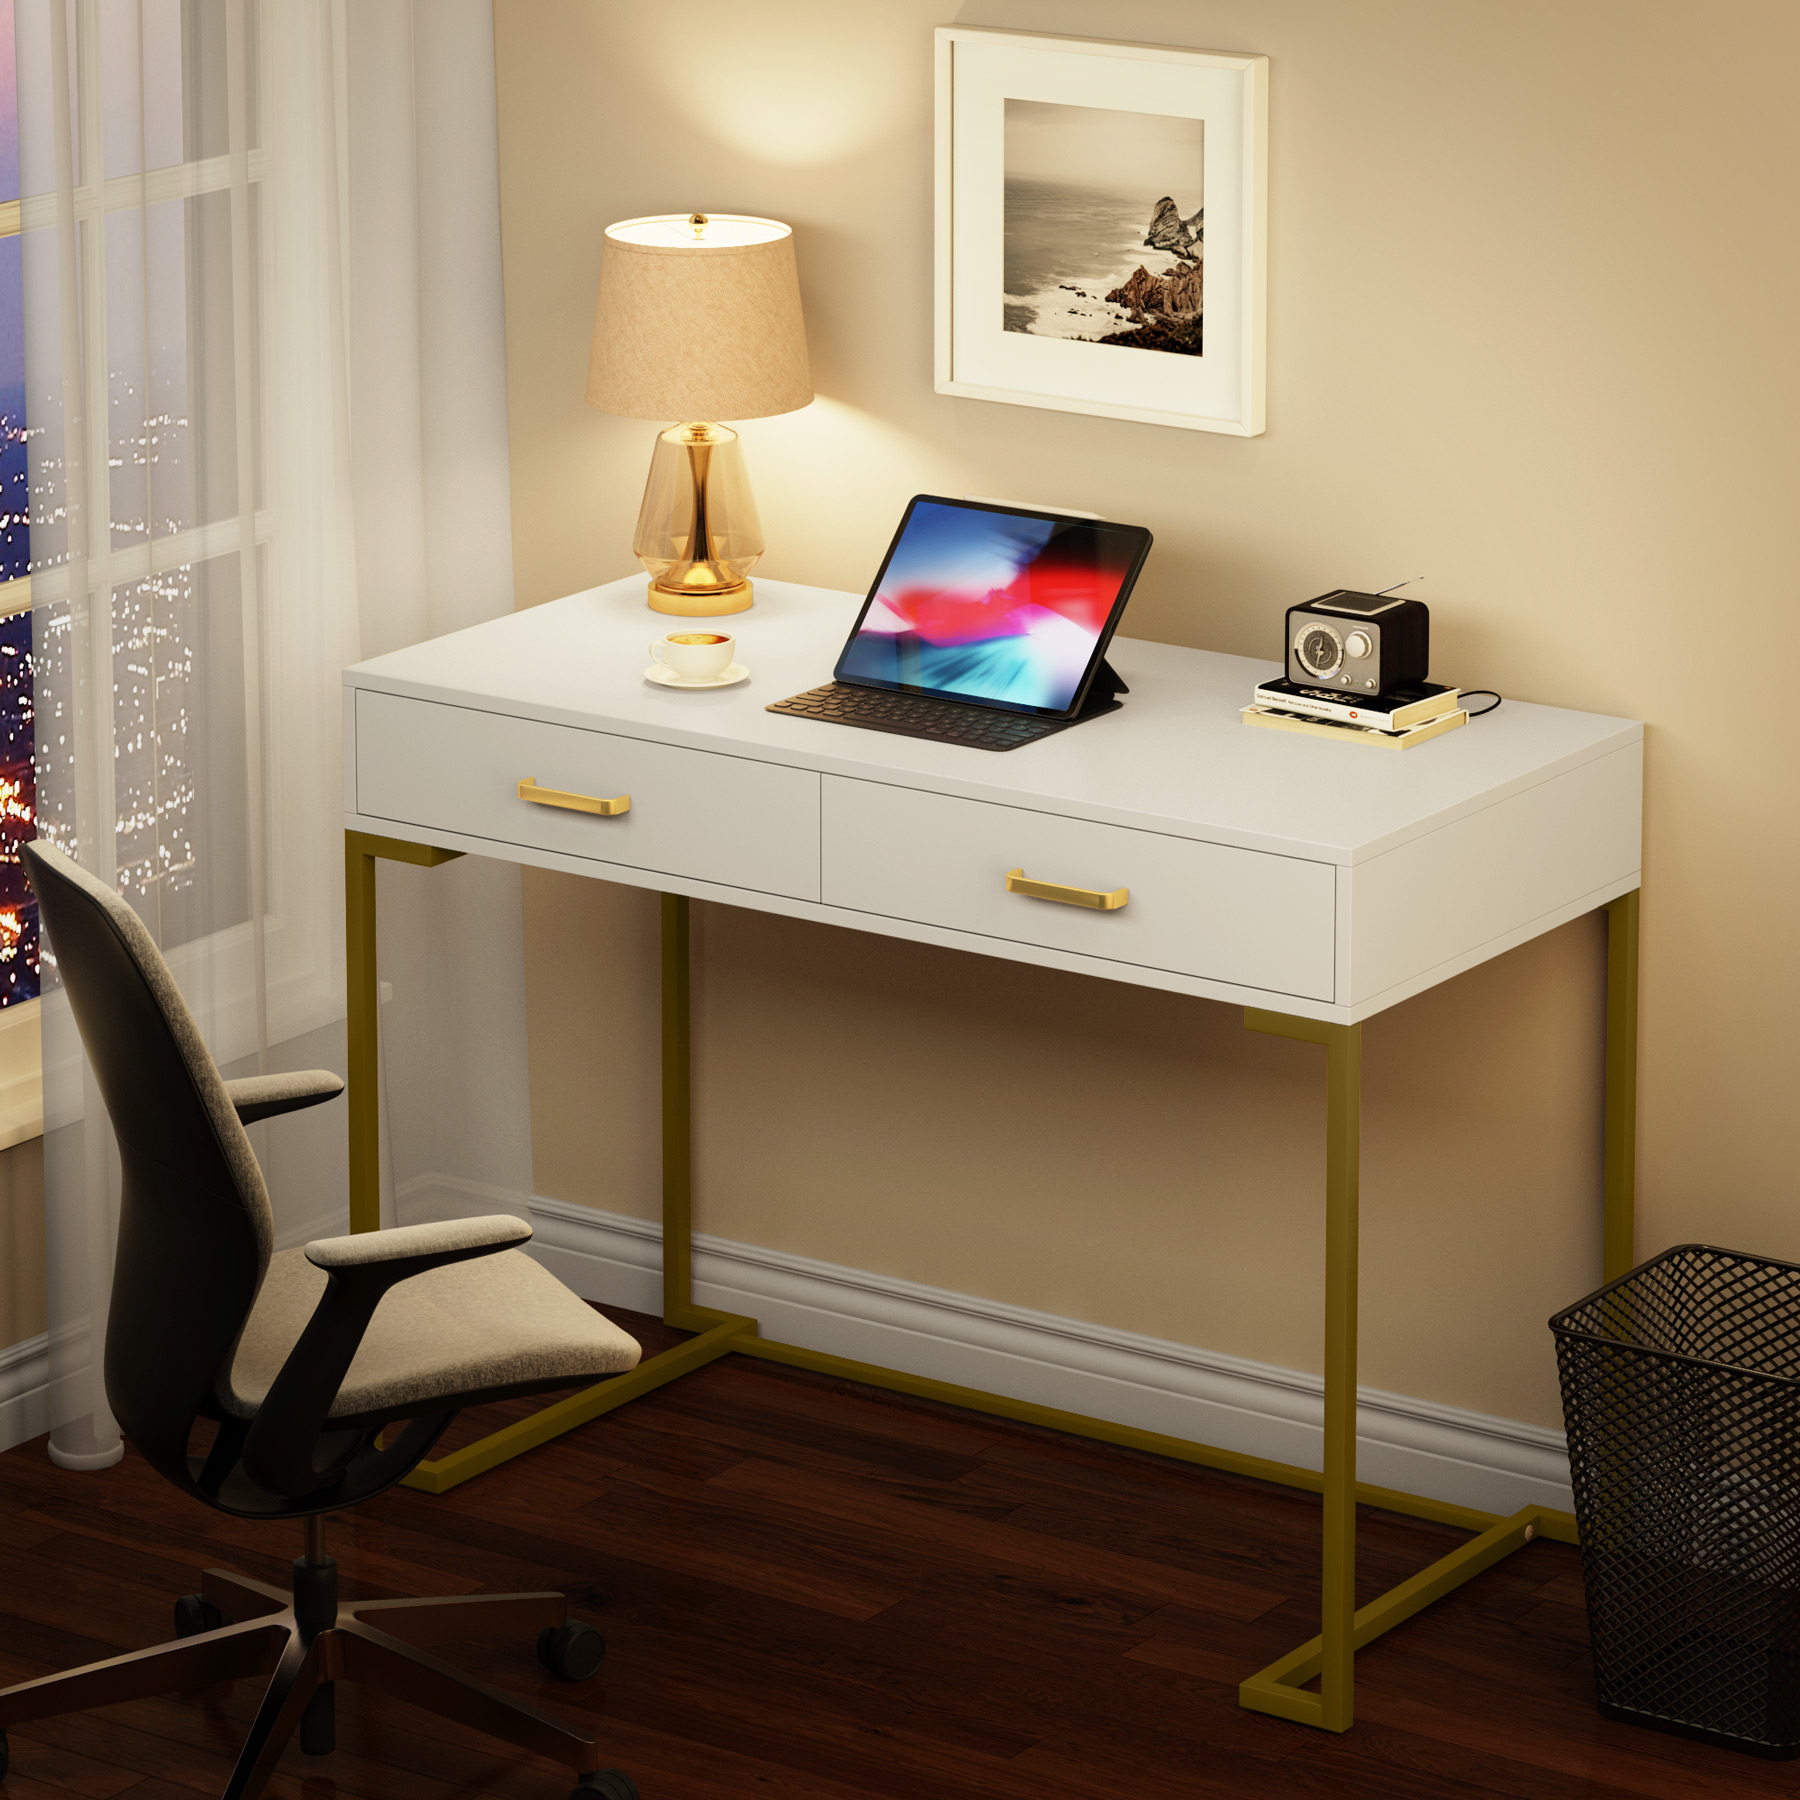 40 Small Desk With Drawers Modern Makeup Vanity Desk